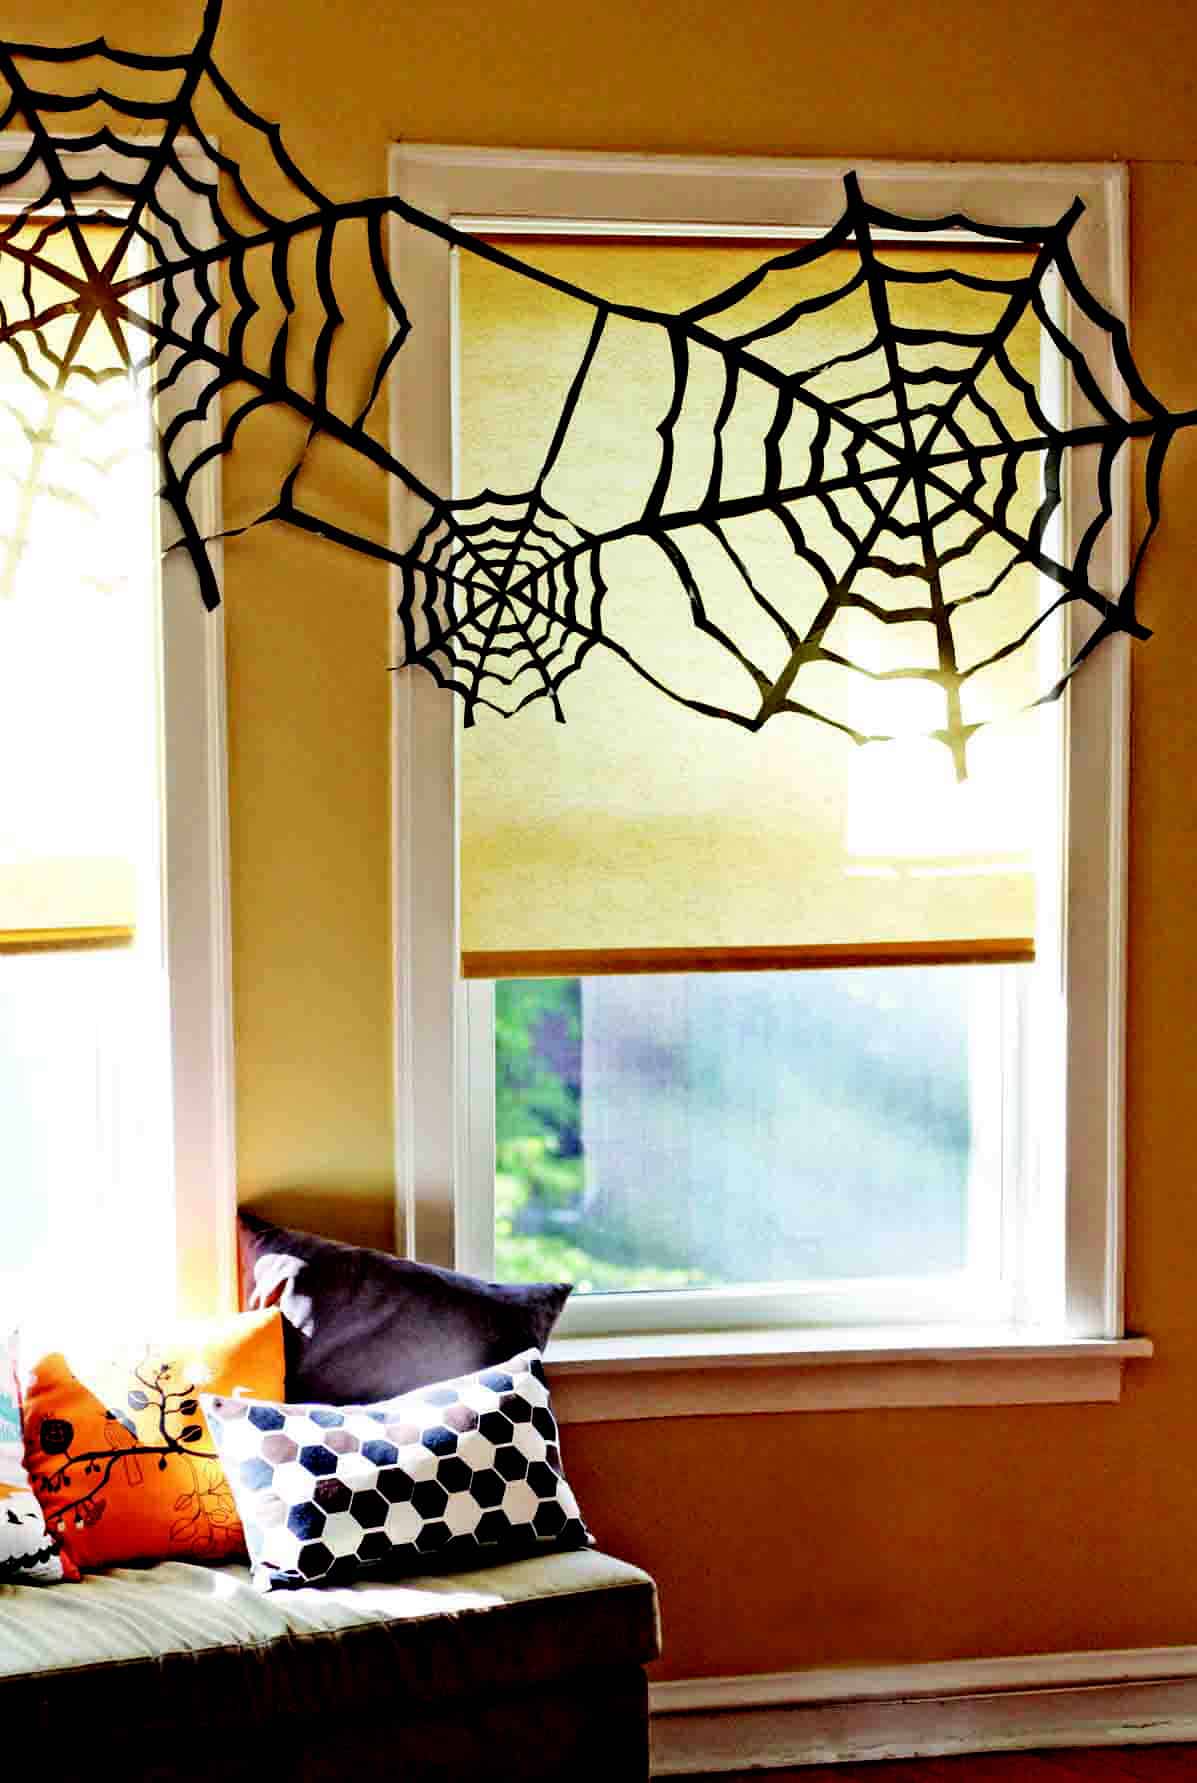 halloween26 - It's cheap and easy to turn a garbage bag into a spider web Halloween decoration. - Photo credit: Jessica Jones (can also be used on wire)